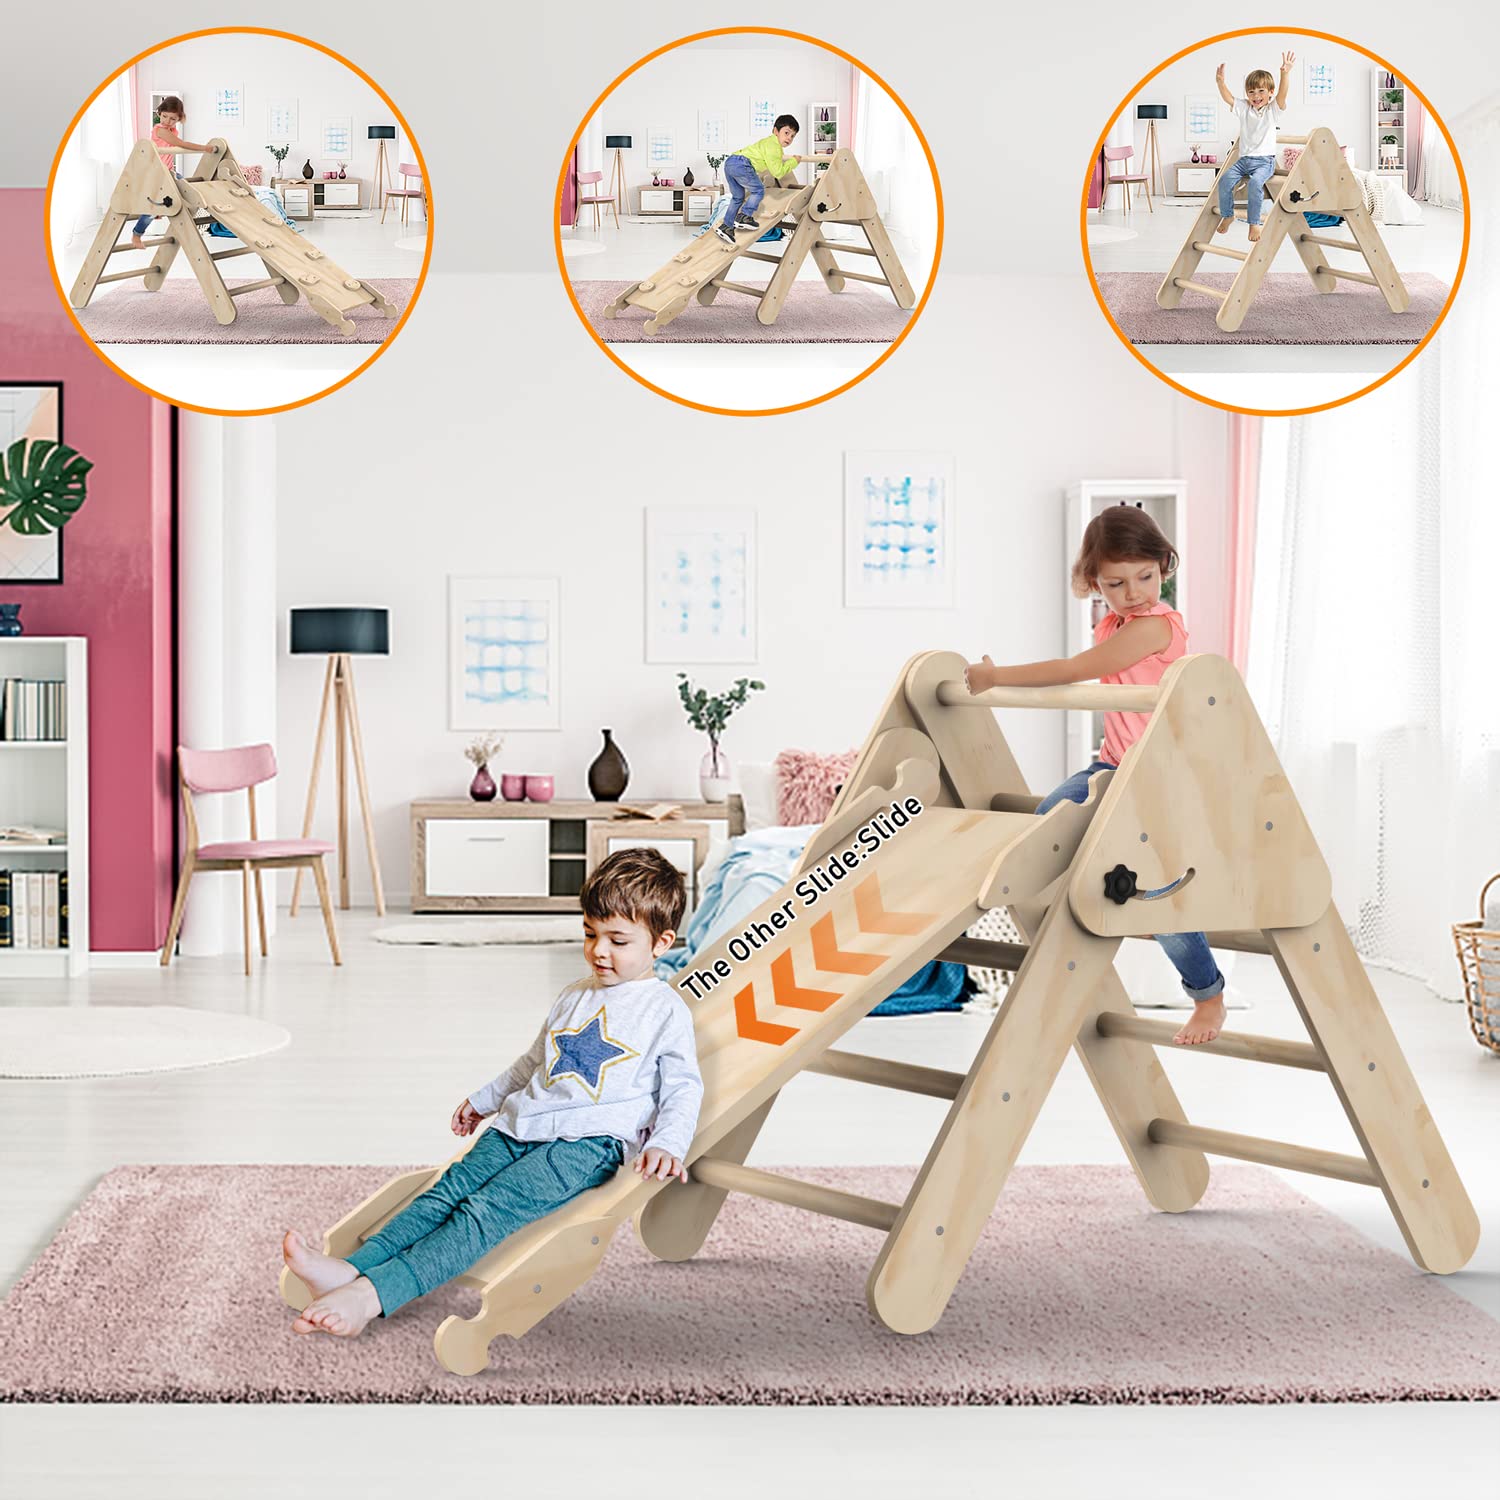 UROSULO Toddler Climbing Toys Indoor, Foldable Climbing Toys for Toddlers, Montessori Climbing Set with Triangle Climber, Arch Ramp, Rock Climber, Slide, Rocker, Wooden Montessori Toys for Toddlers